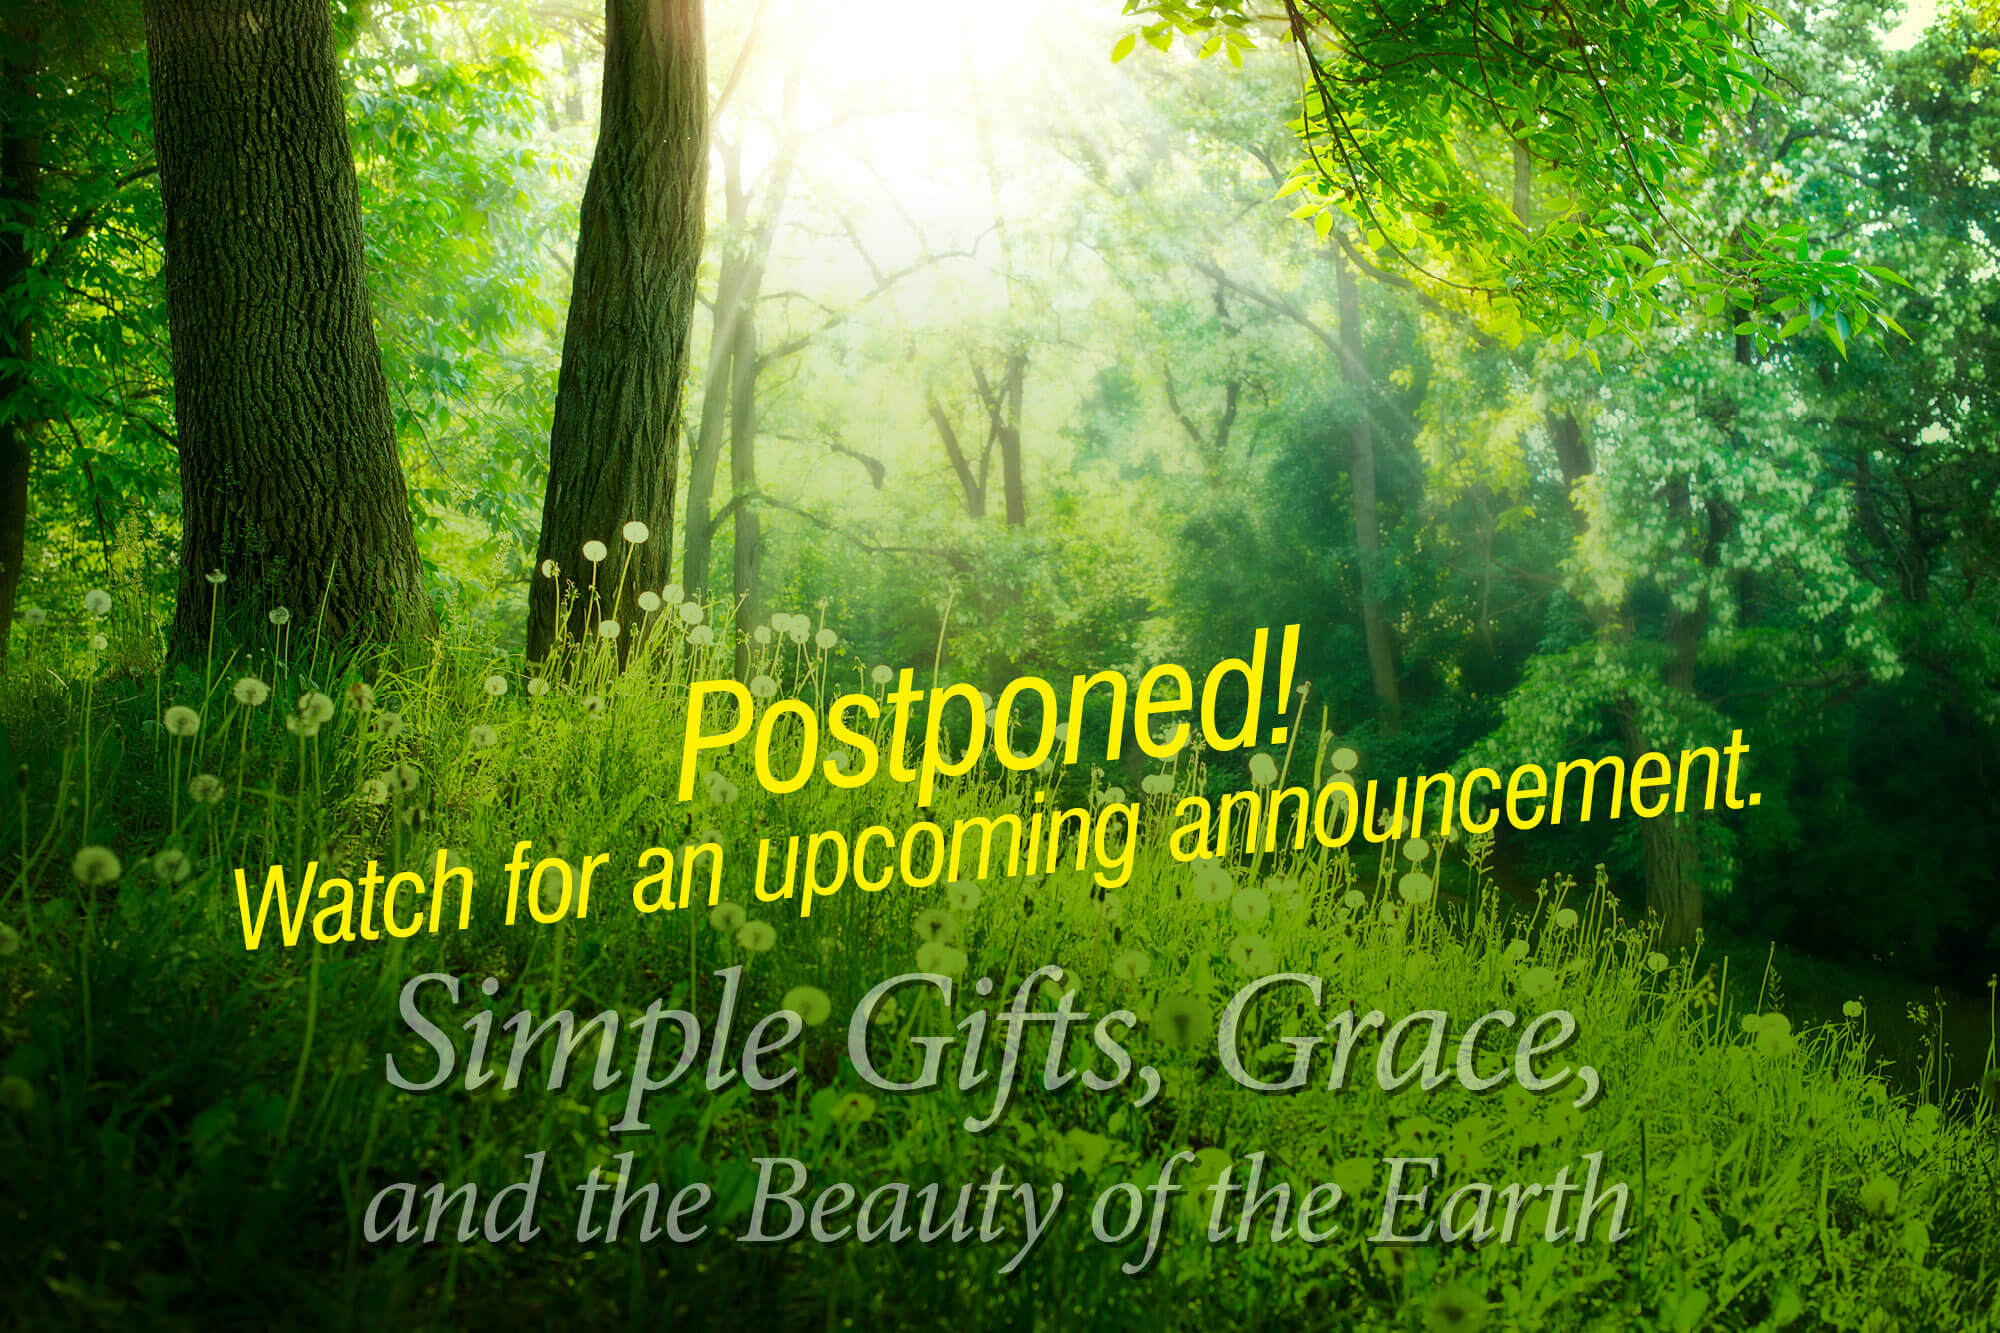 Photograph of trees and grass with the words "Simple Gifts, Grace, and the Beauty of the Earth Postponed."